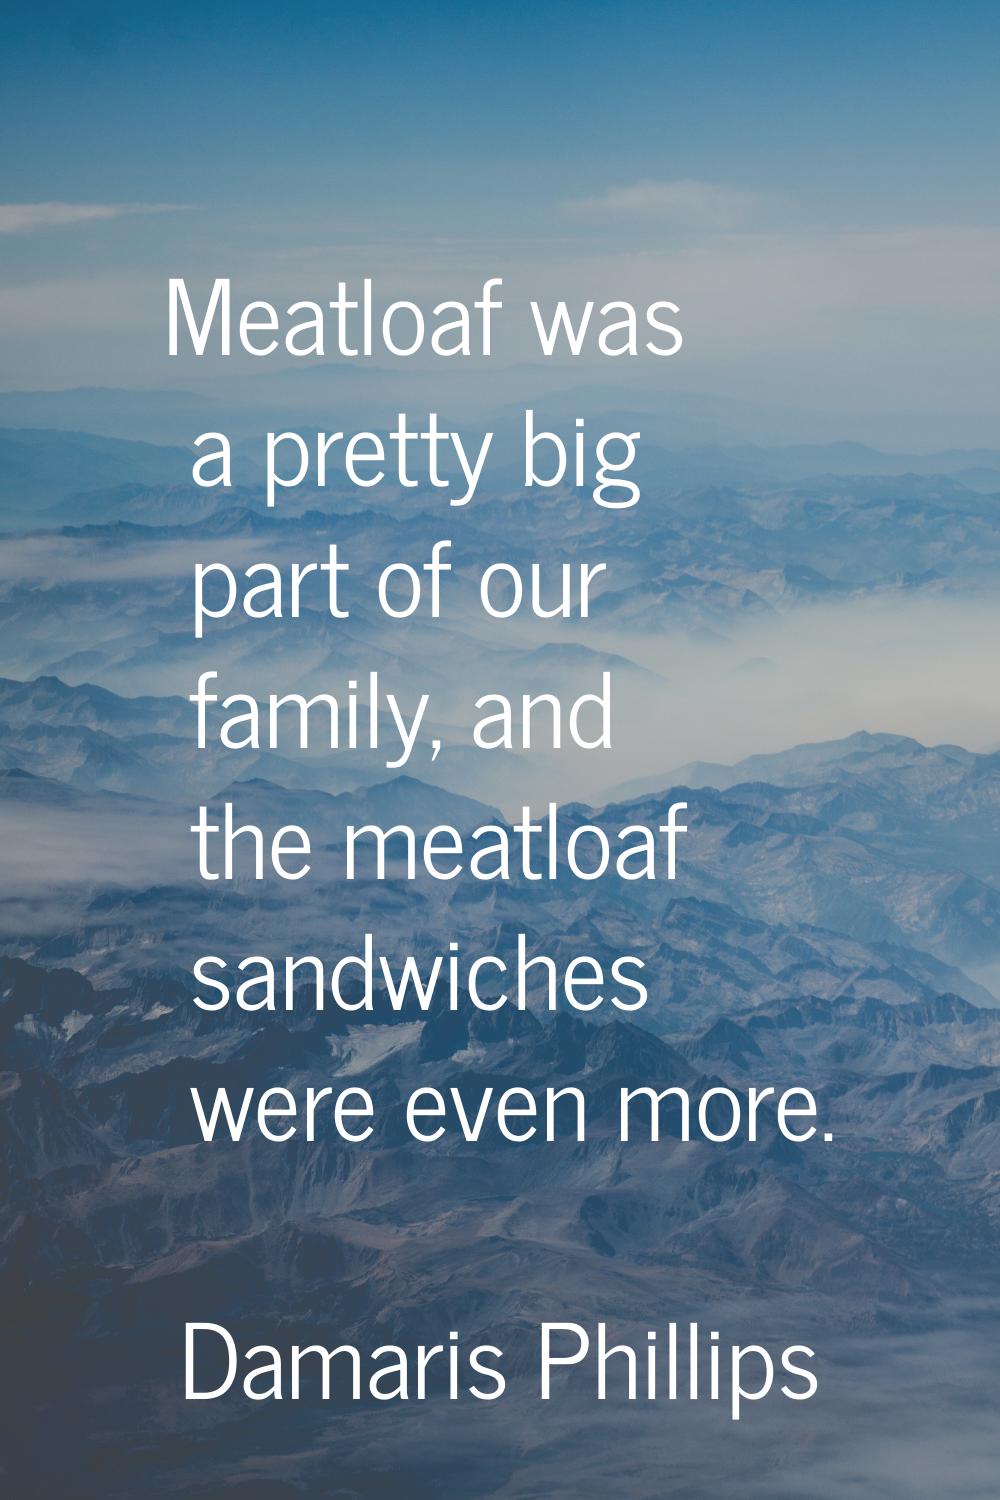 Meatloaf was a pretty big part of our family, and the meatloaf sandwiches were even more.